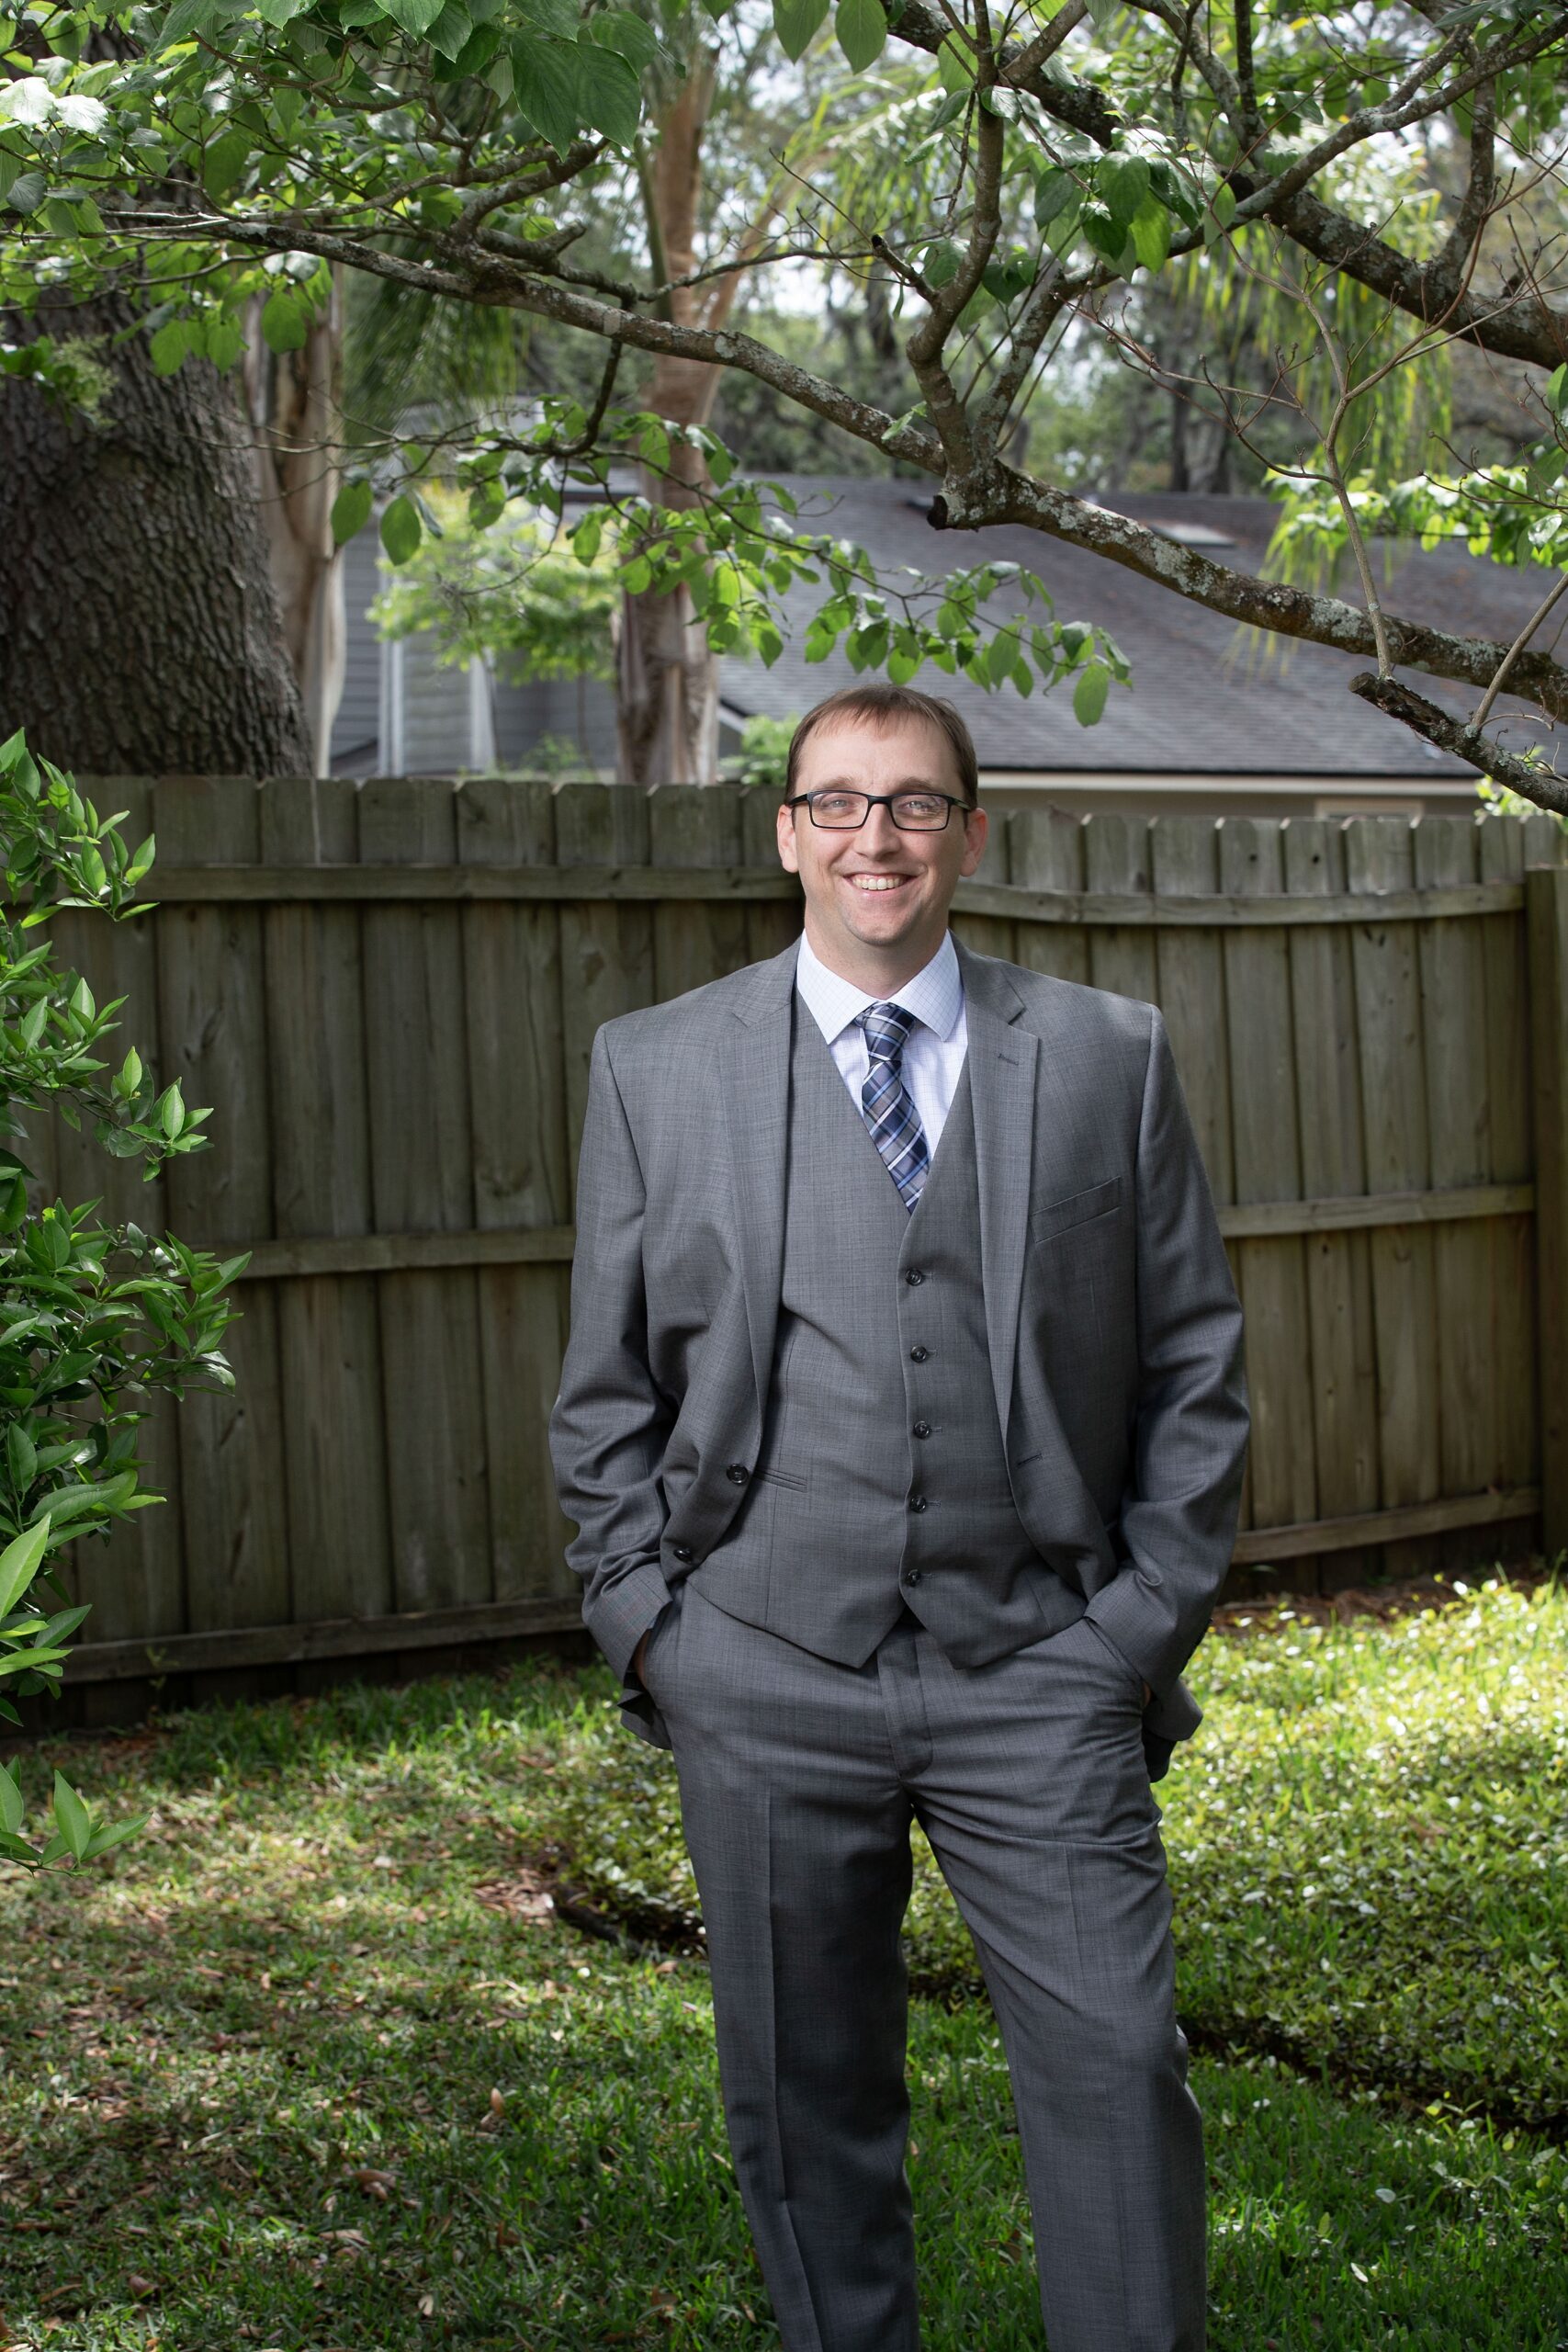 A groom in a grey suit stands in a yard with hands in pockets